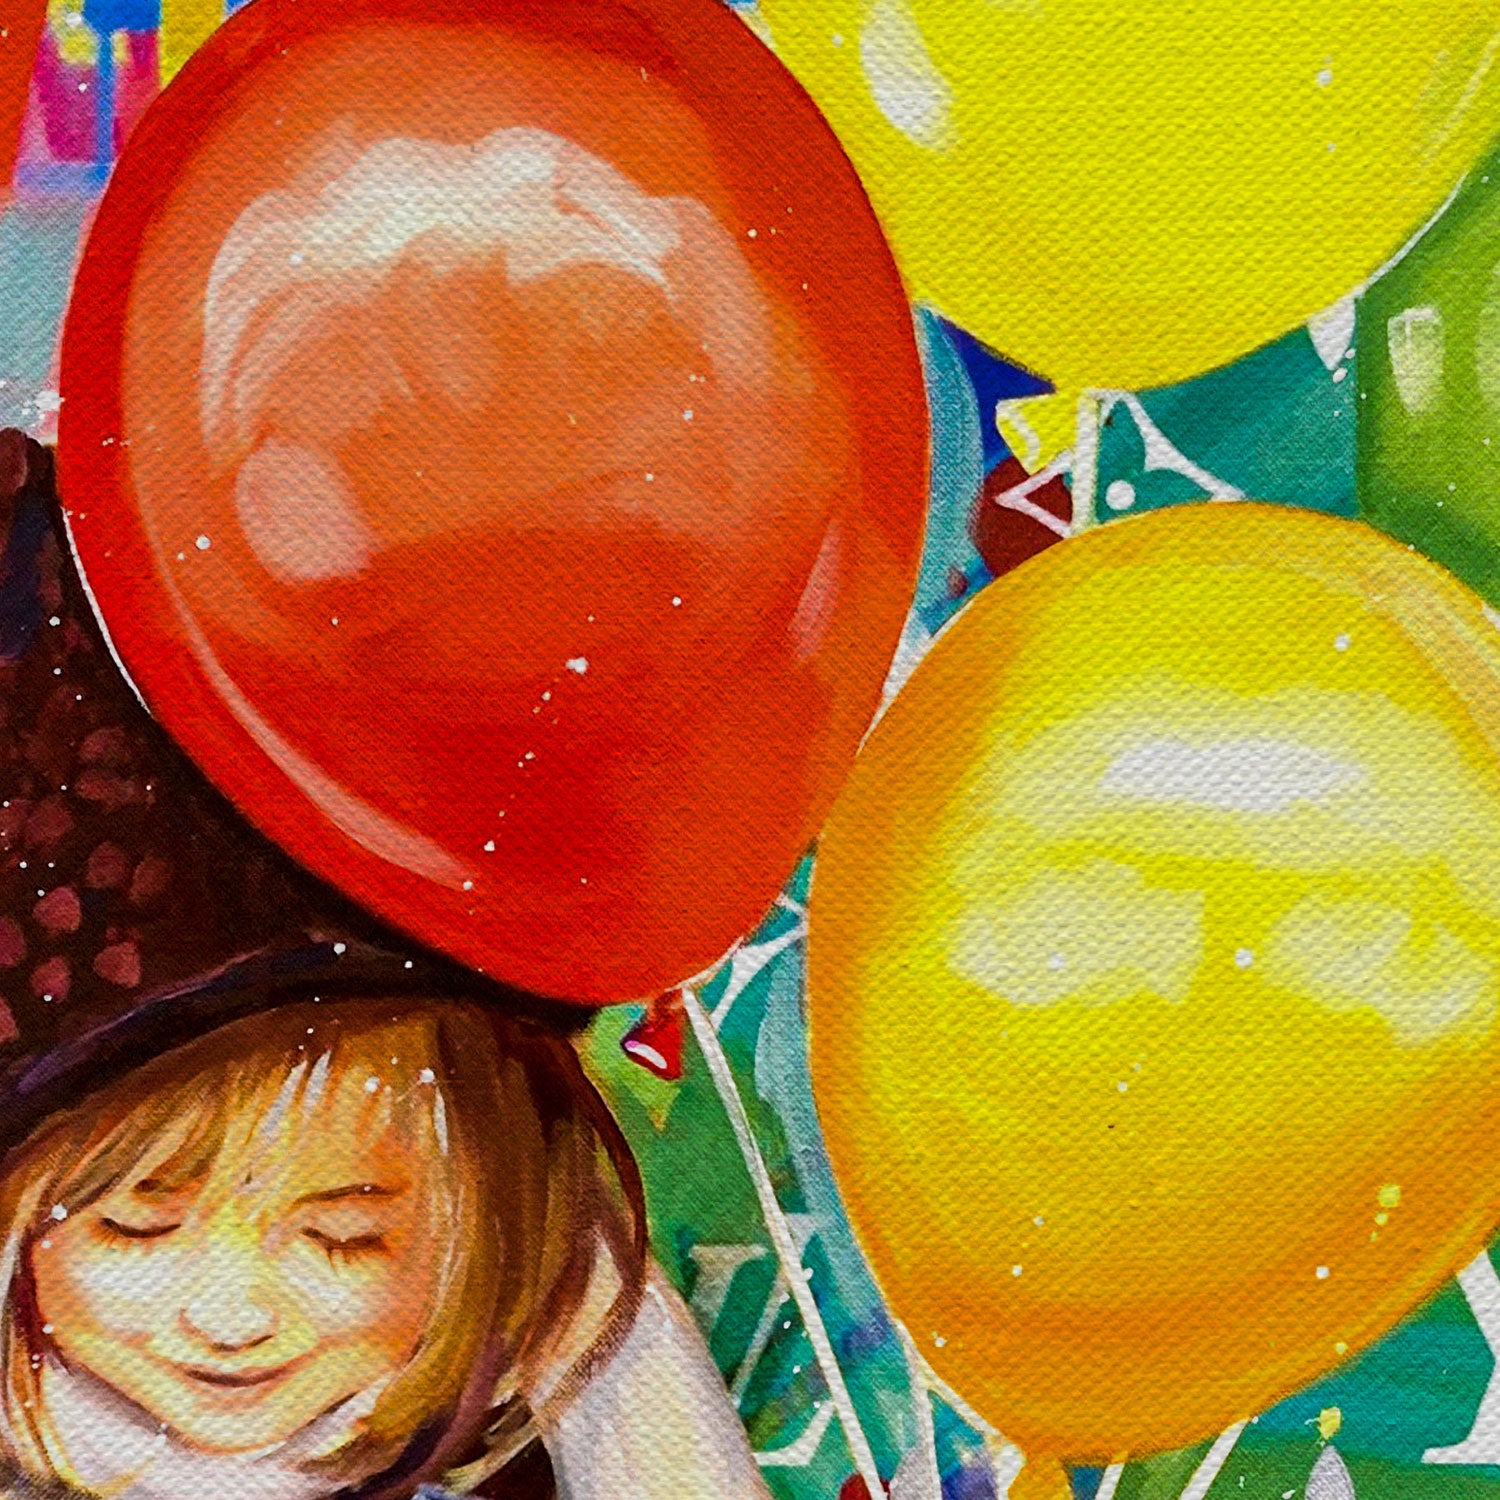 Little Girl With Colorful Balloons Canvas Wall Art